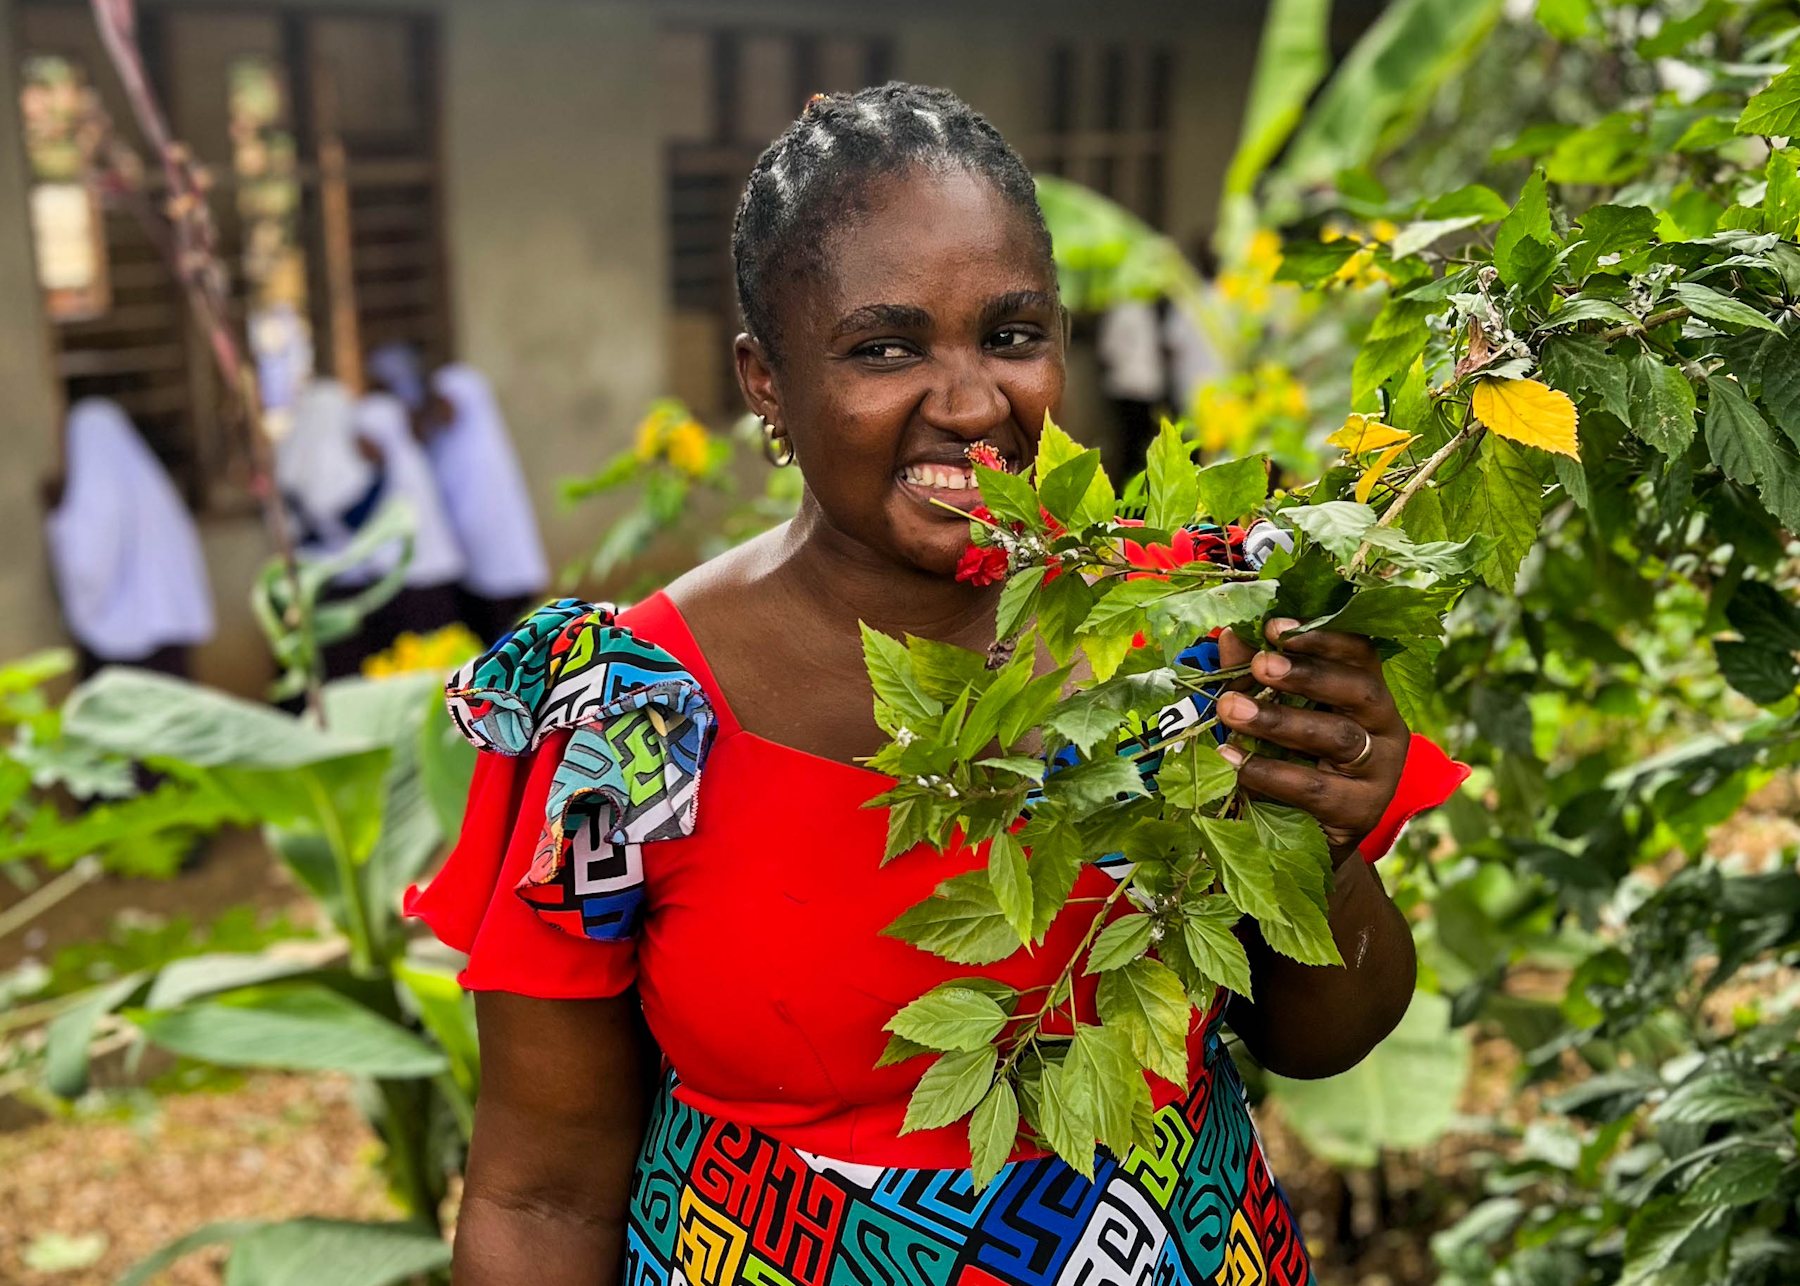 At Nzasa Secondary School in Dar es Salaam, Tanzania, Madam Lusajo Chanya has been teaching her students in the one-year-old micro-forest planted on the school grounds.